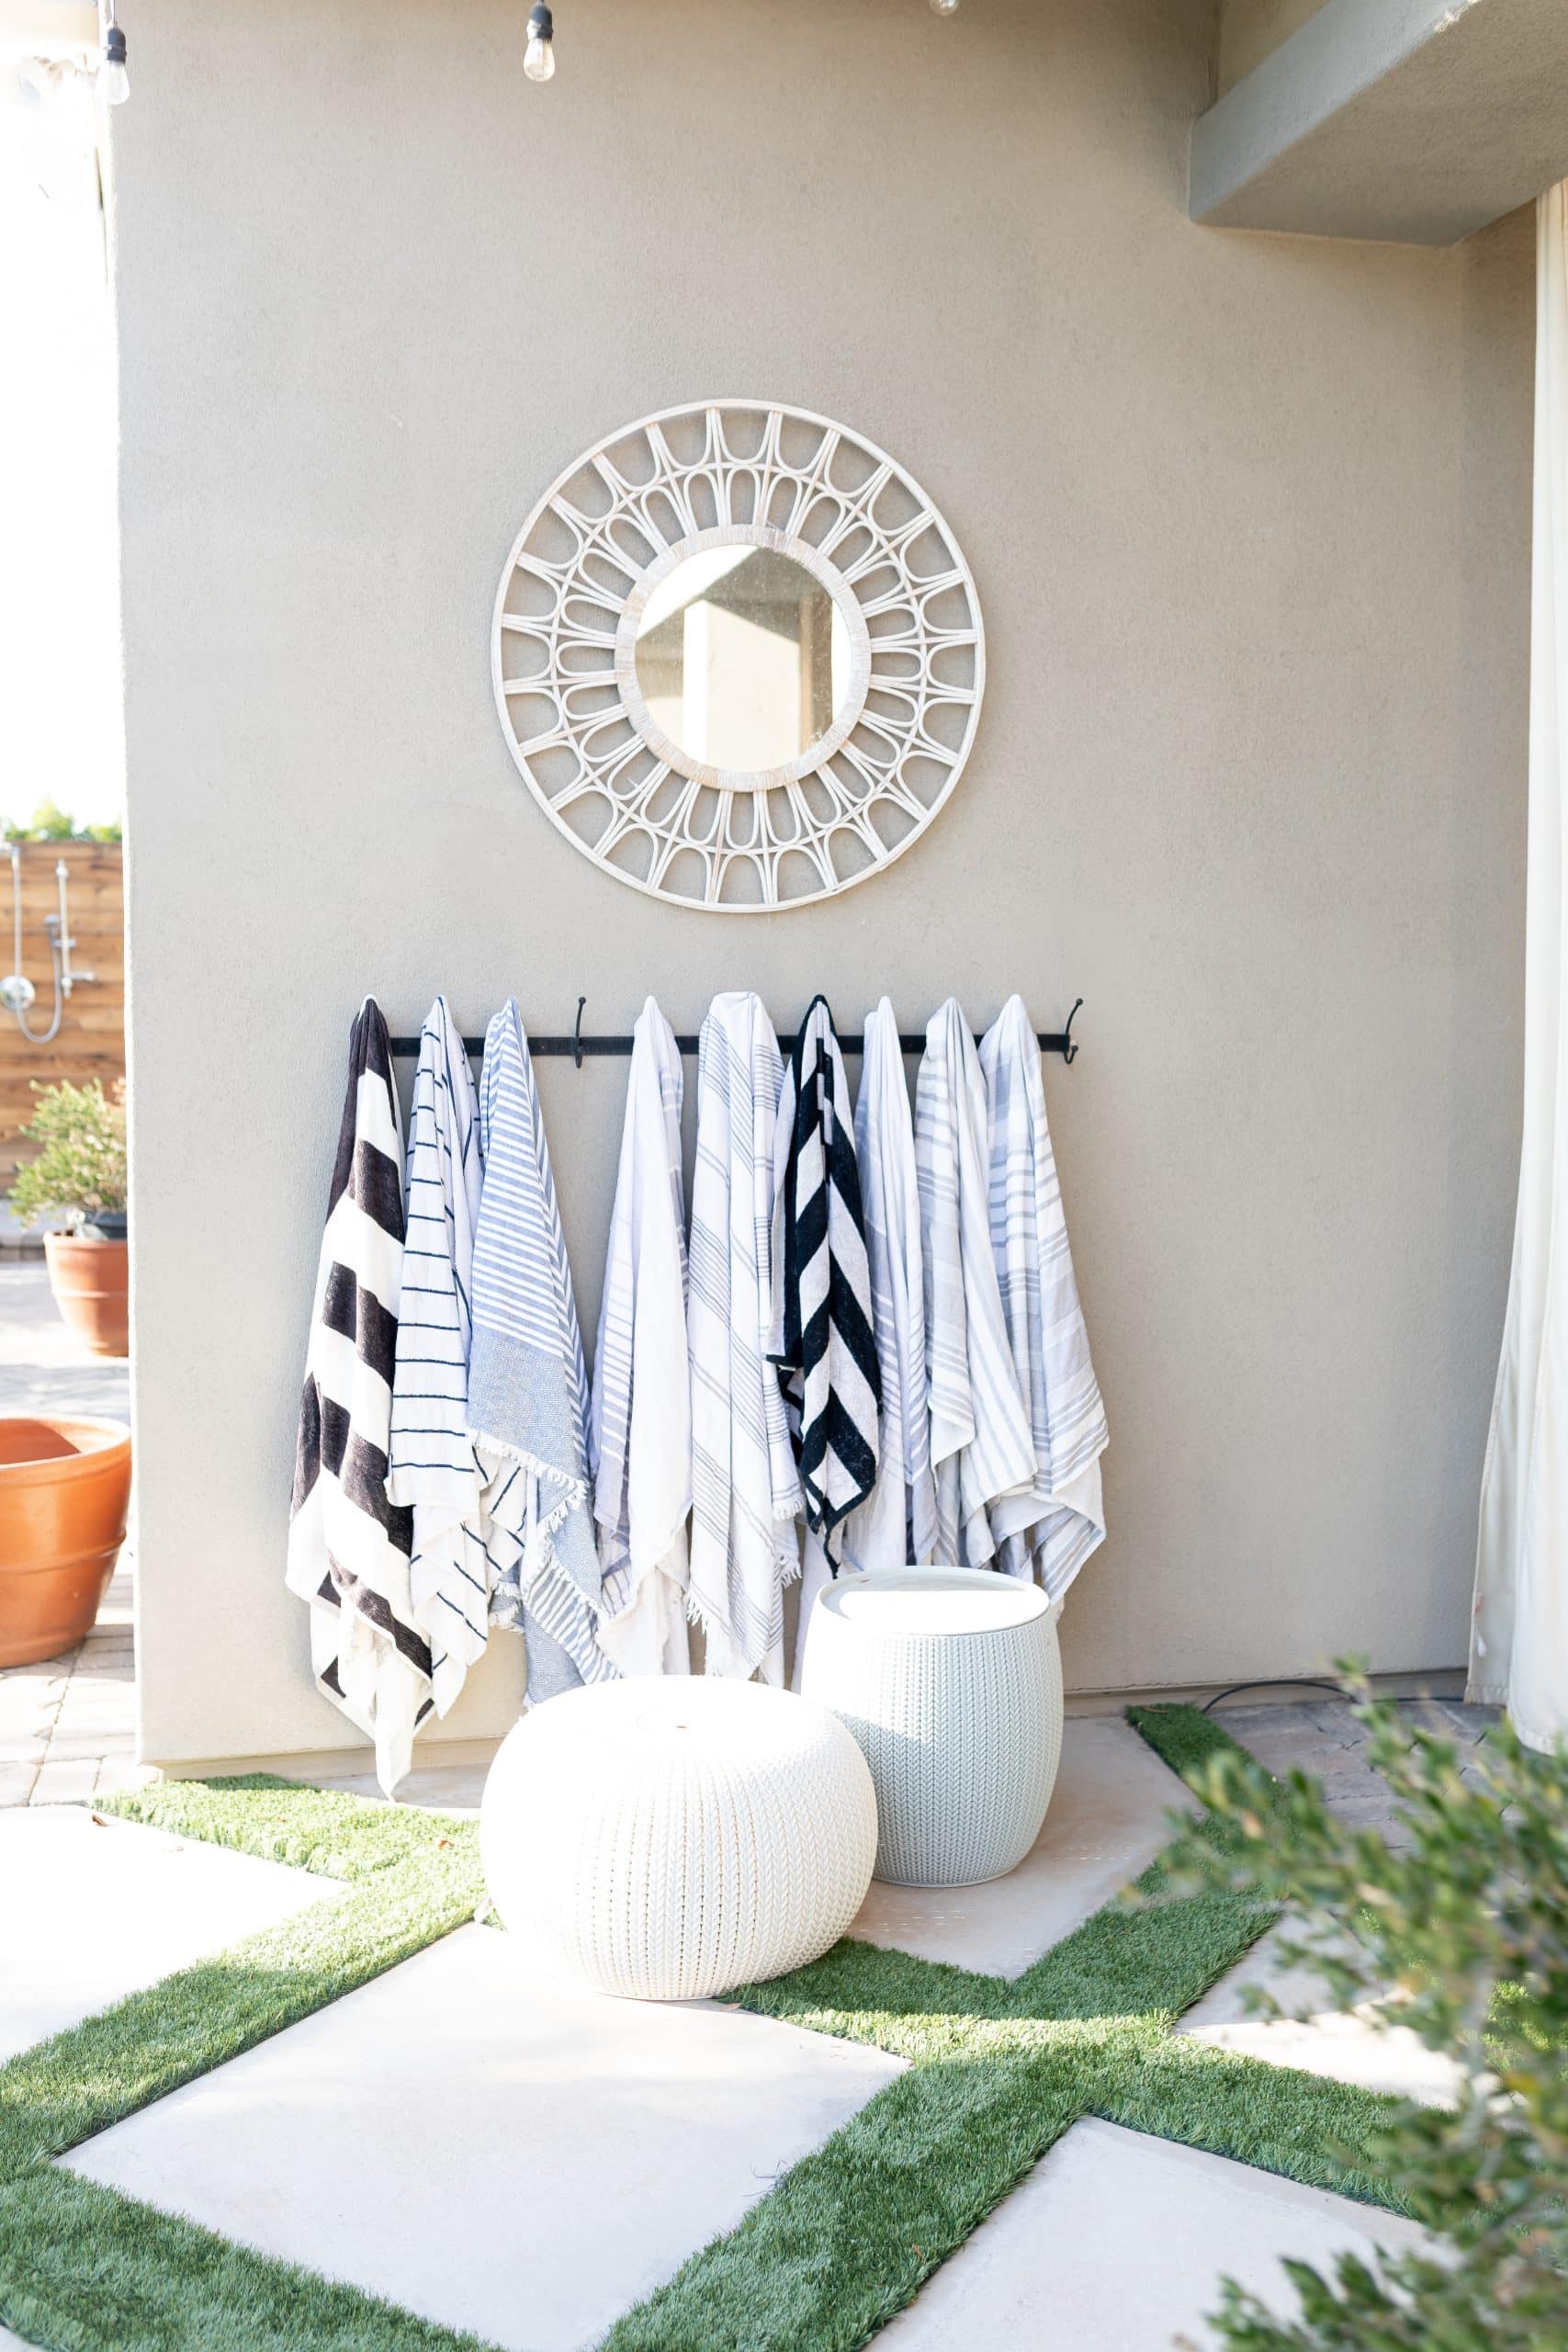 Outdoor pool towels hanging on a hook. Gray house with outdoor mirror